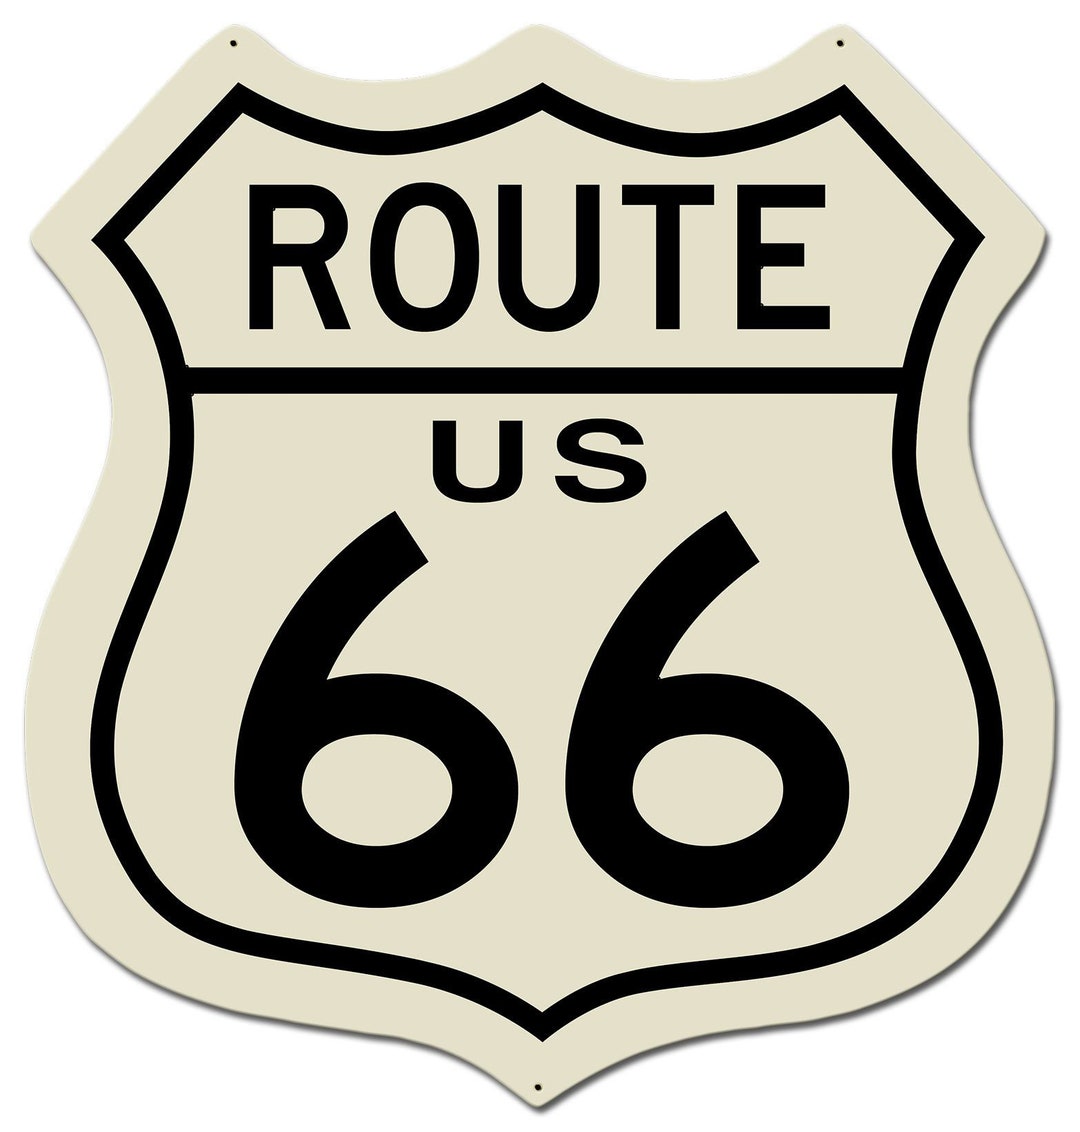 U.S. Route 66 Metal Sign, Large 28 X 29 Inches, Nostalgic Auto Car Gas ...